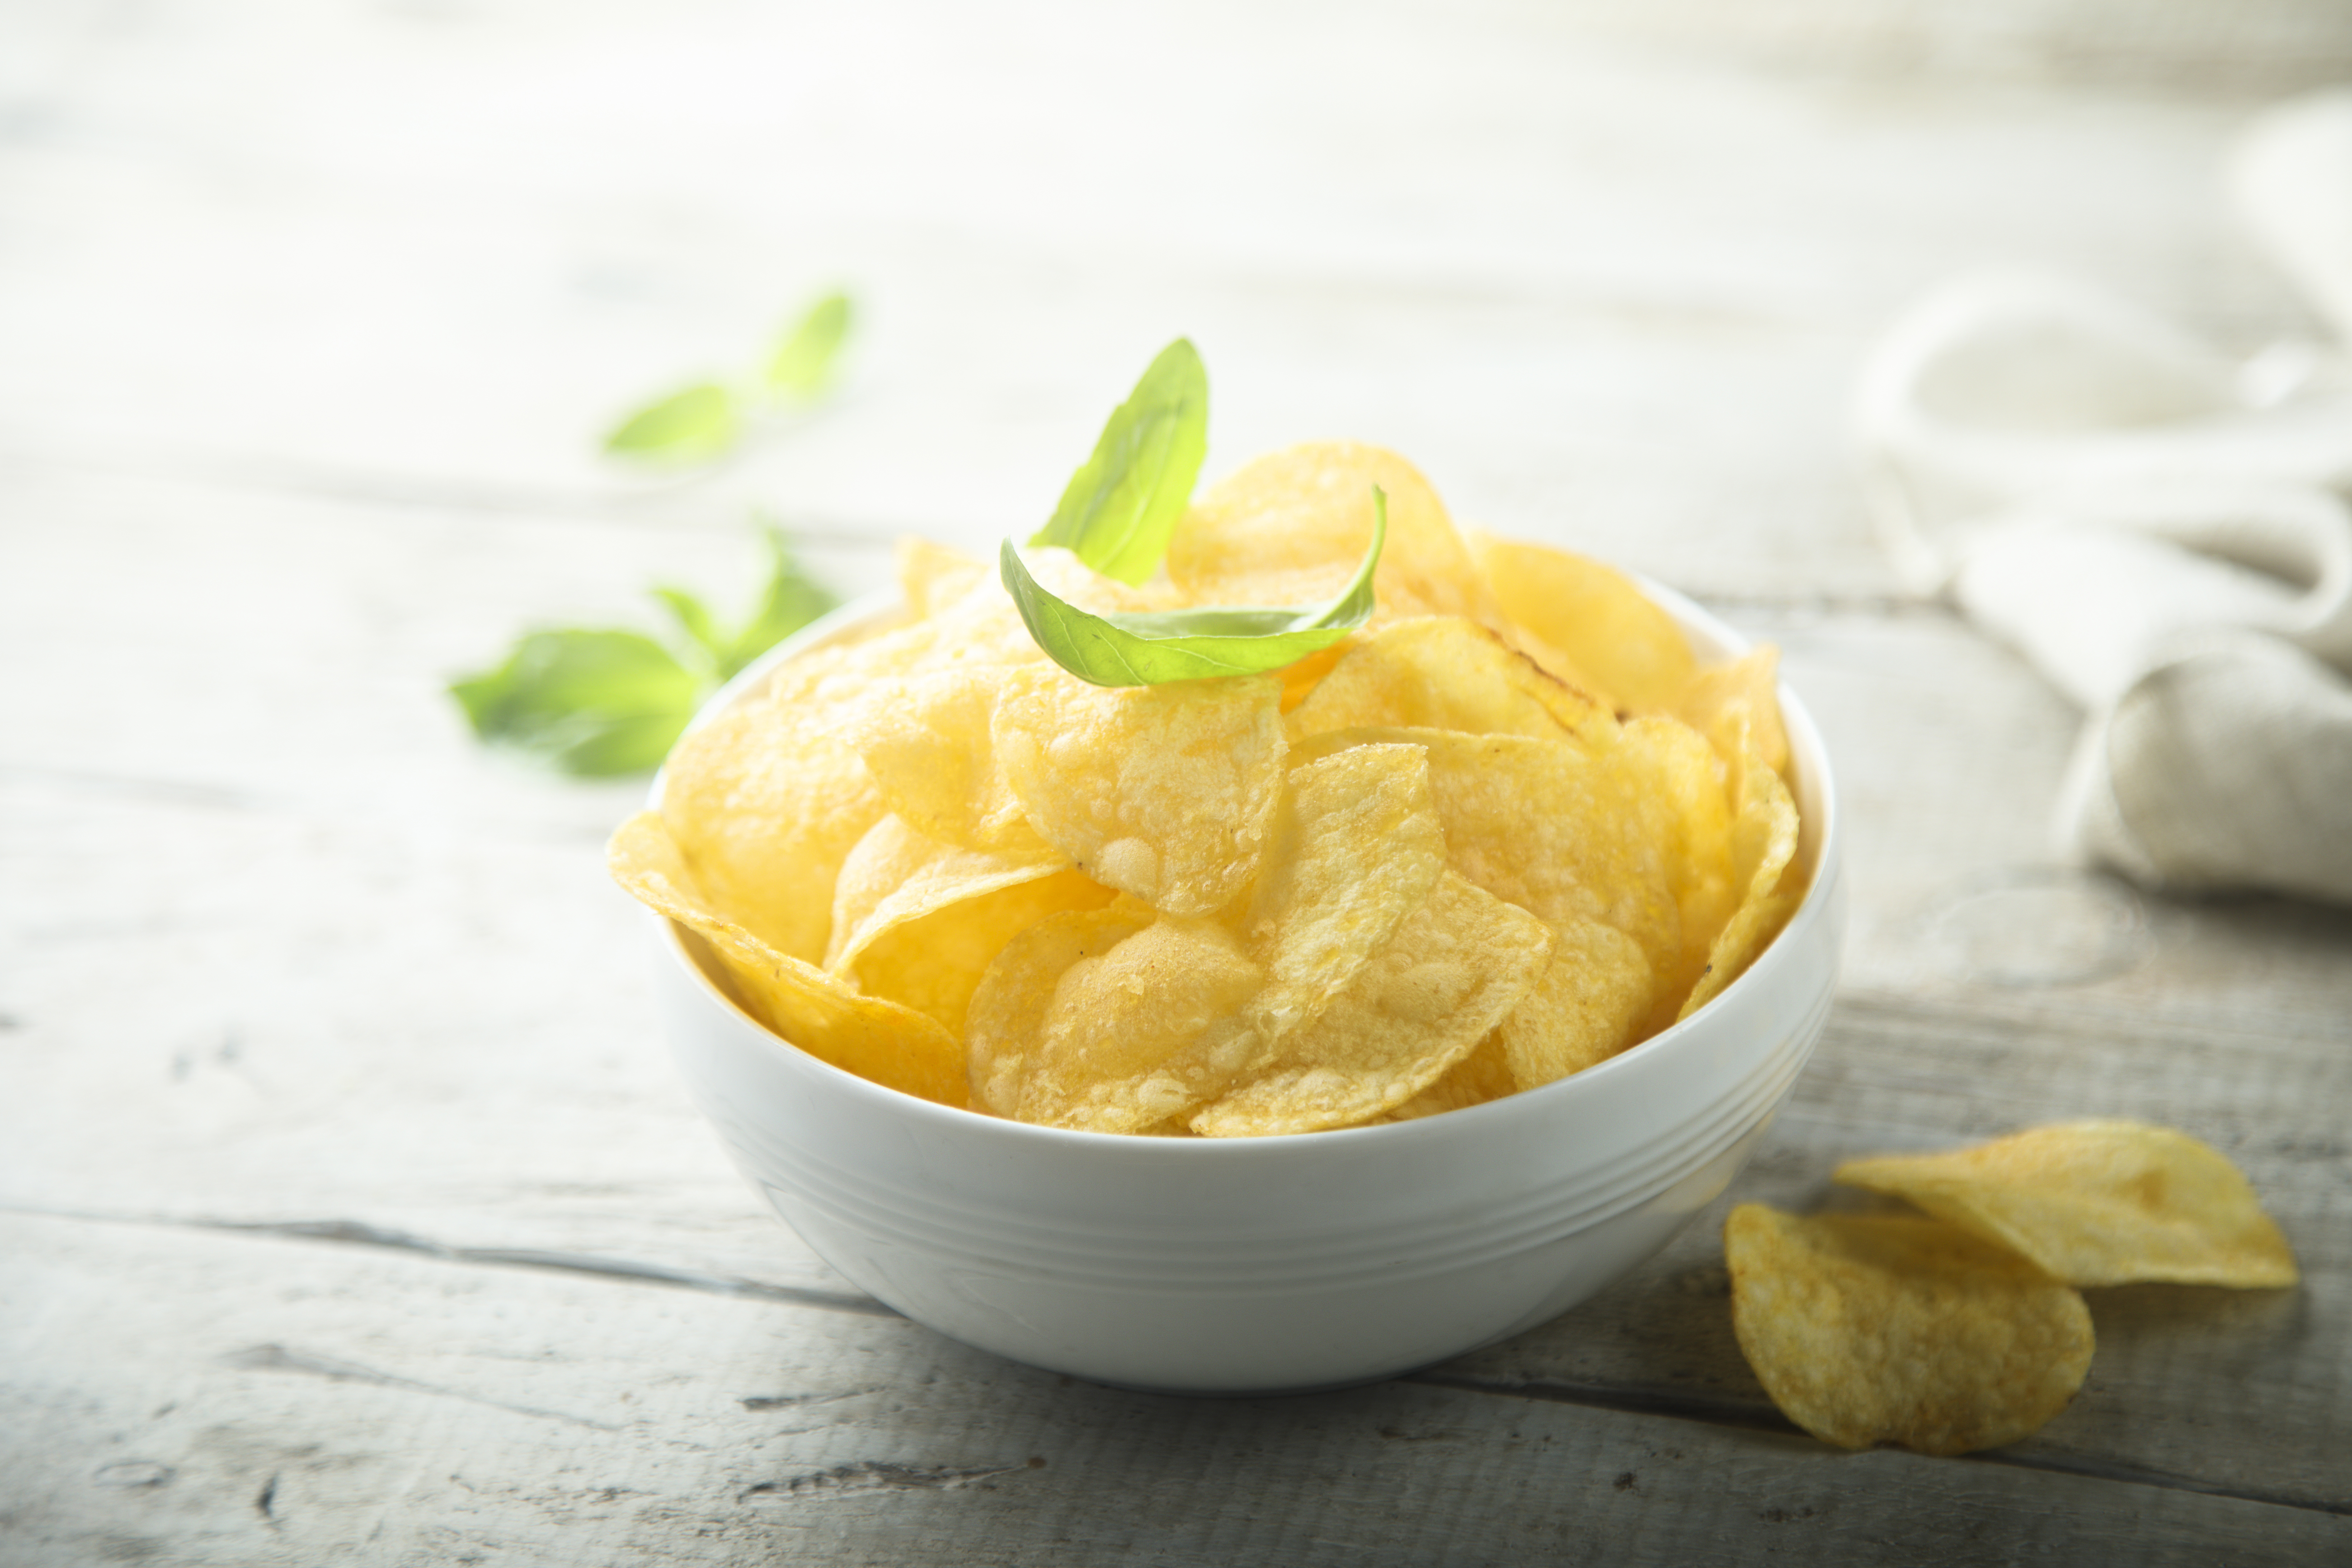 Are Chips Gluten-Free? Here Are 14 Gluten-Free Chip Brands to Buy